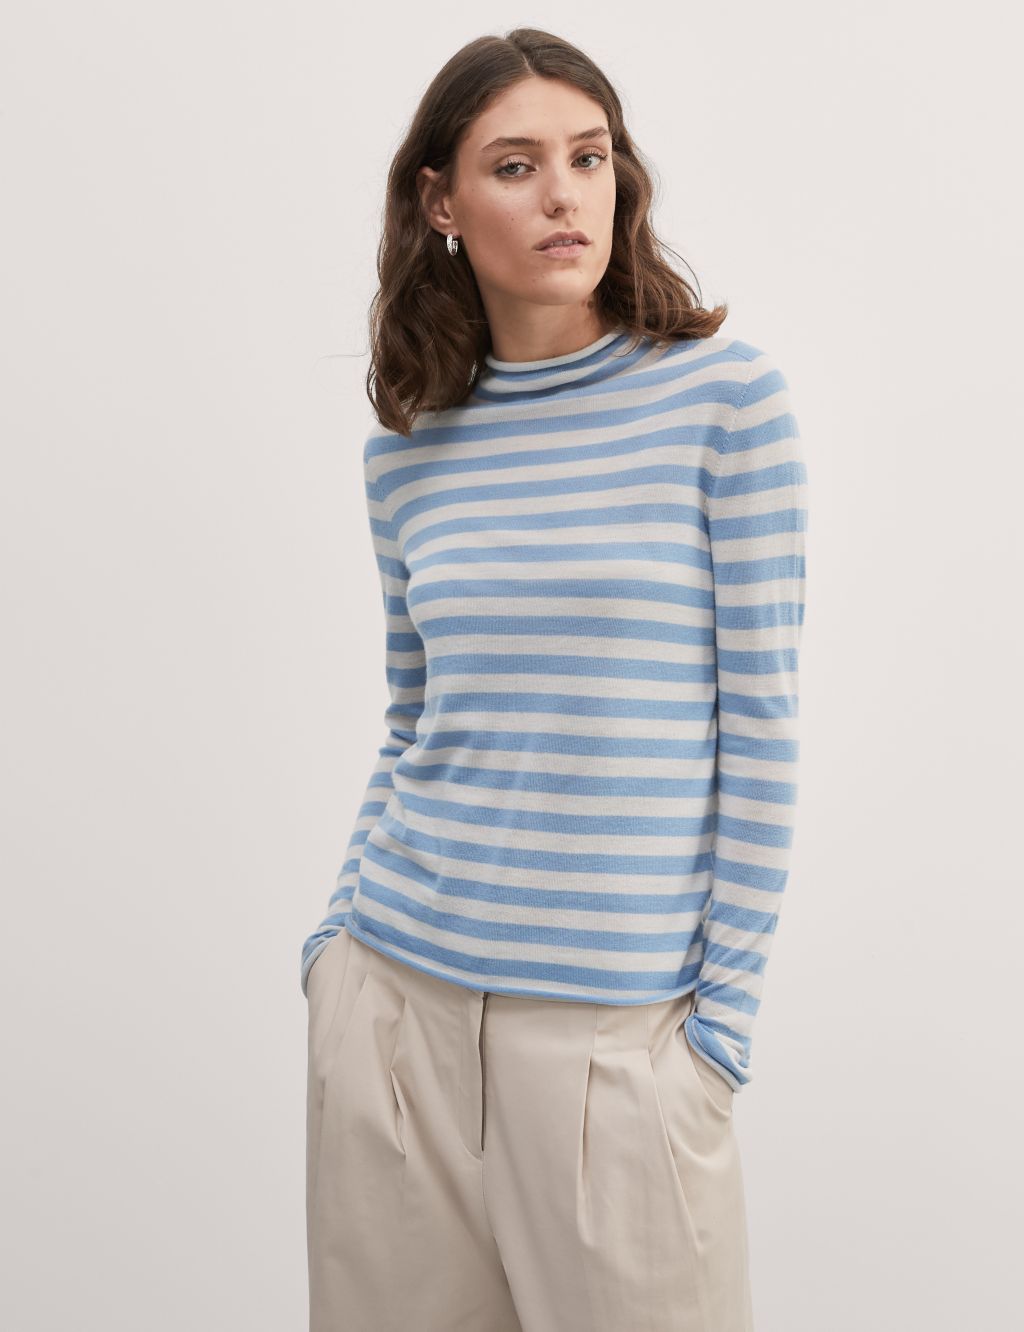 Wool Rich Striped Jumper with Cashmere image 4